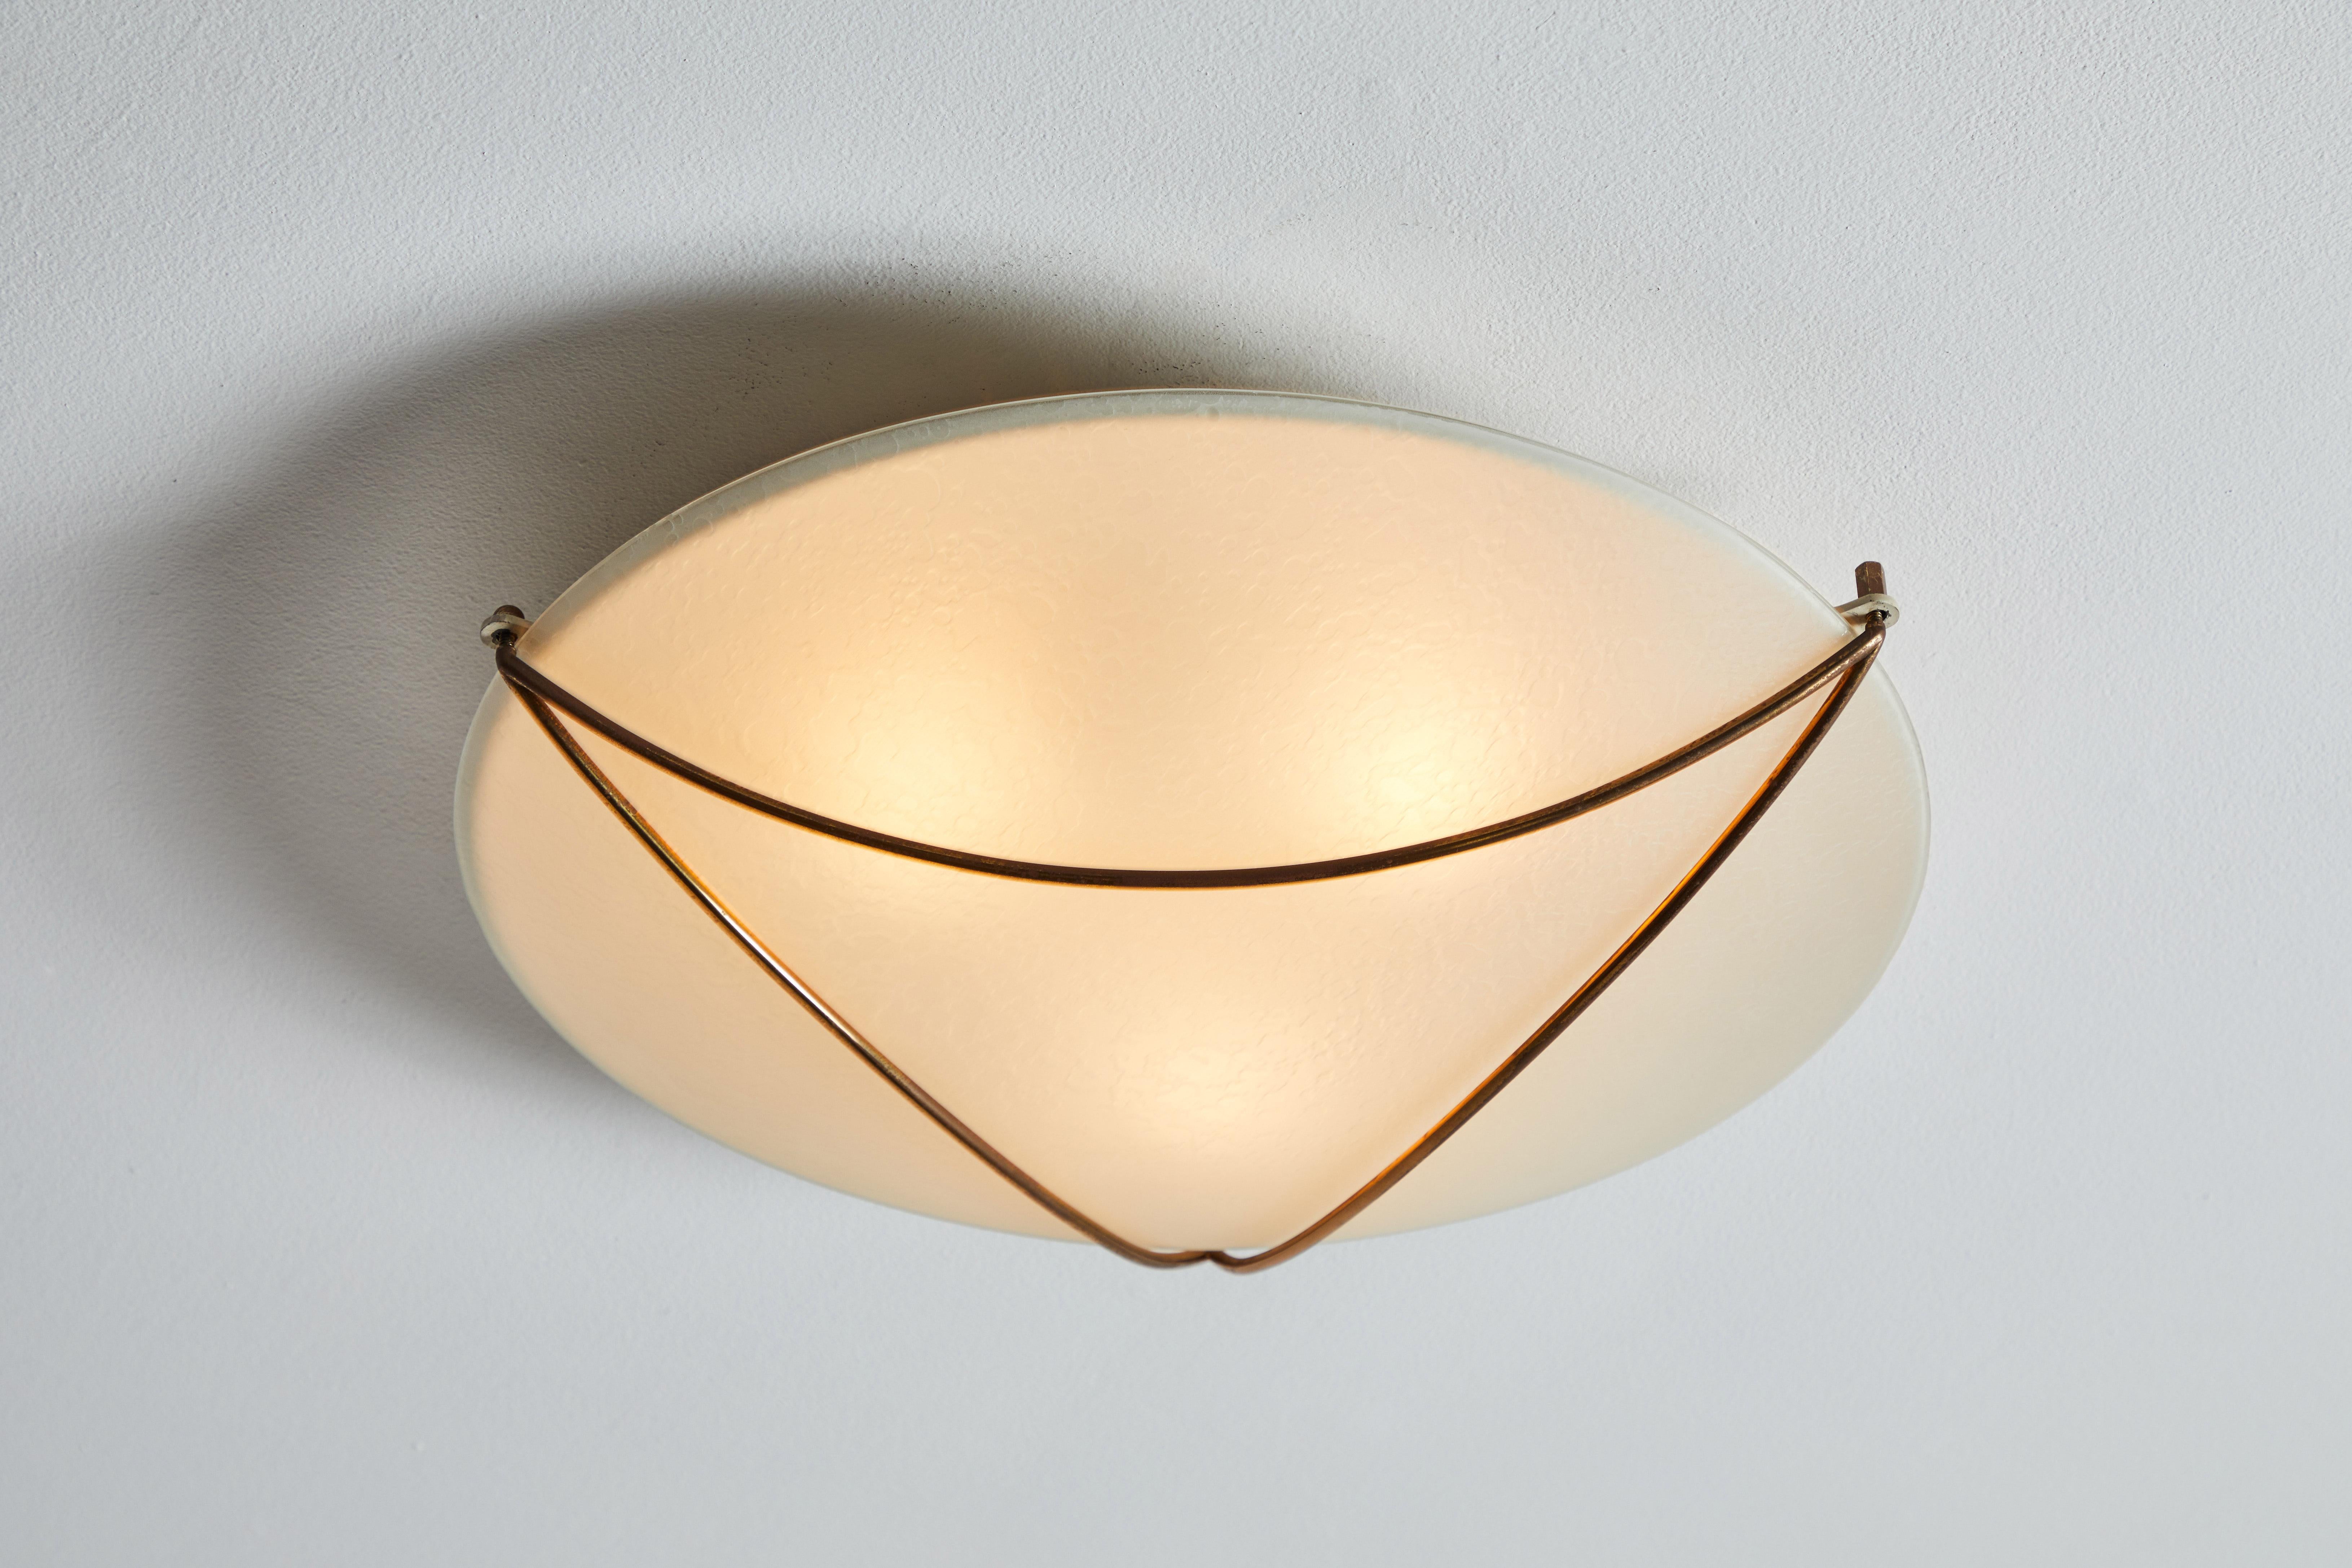 Flush mount ceiling light by Stilnovo. Manufactured in Italy, circa 1950s. Opaline glass and brass. Rewired for U.S. standards. We recommend three E26 25w maximum bulbs. Bulbs provided as a one time courtesy.